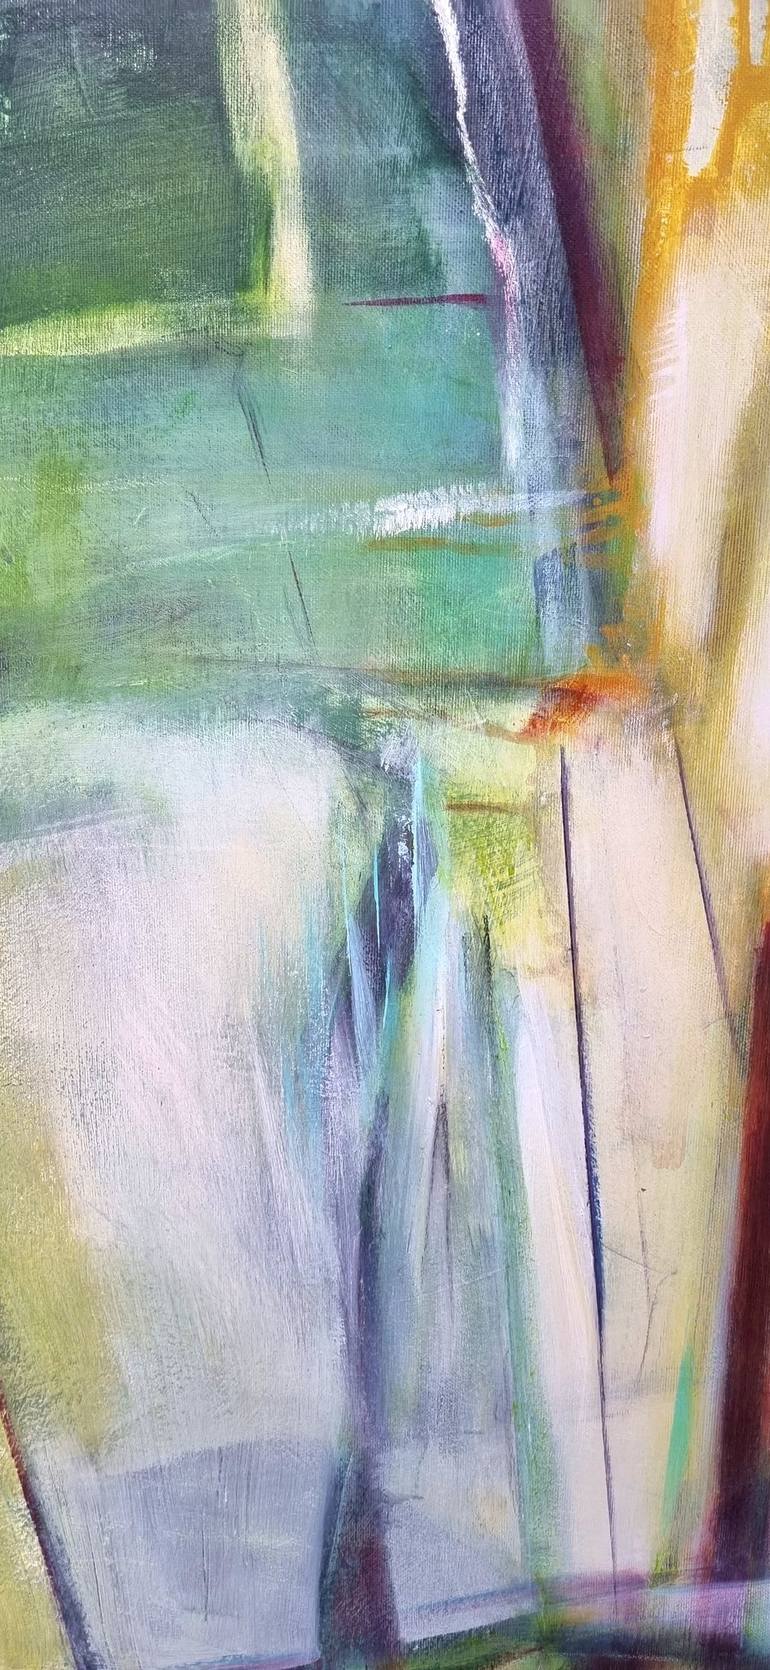 Original Semi-abstract Landscape Painting by Bea Evers